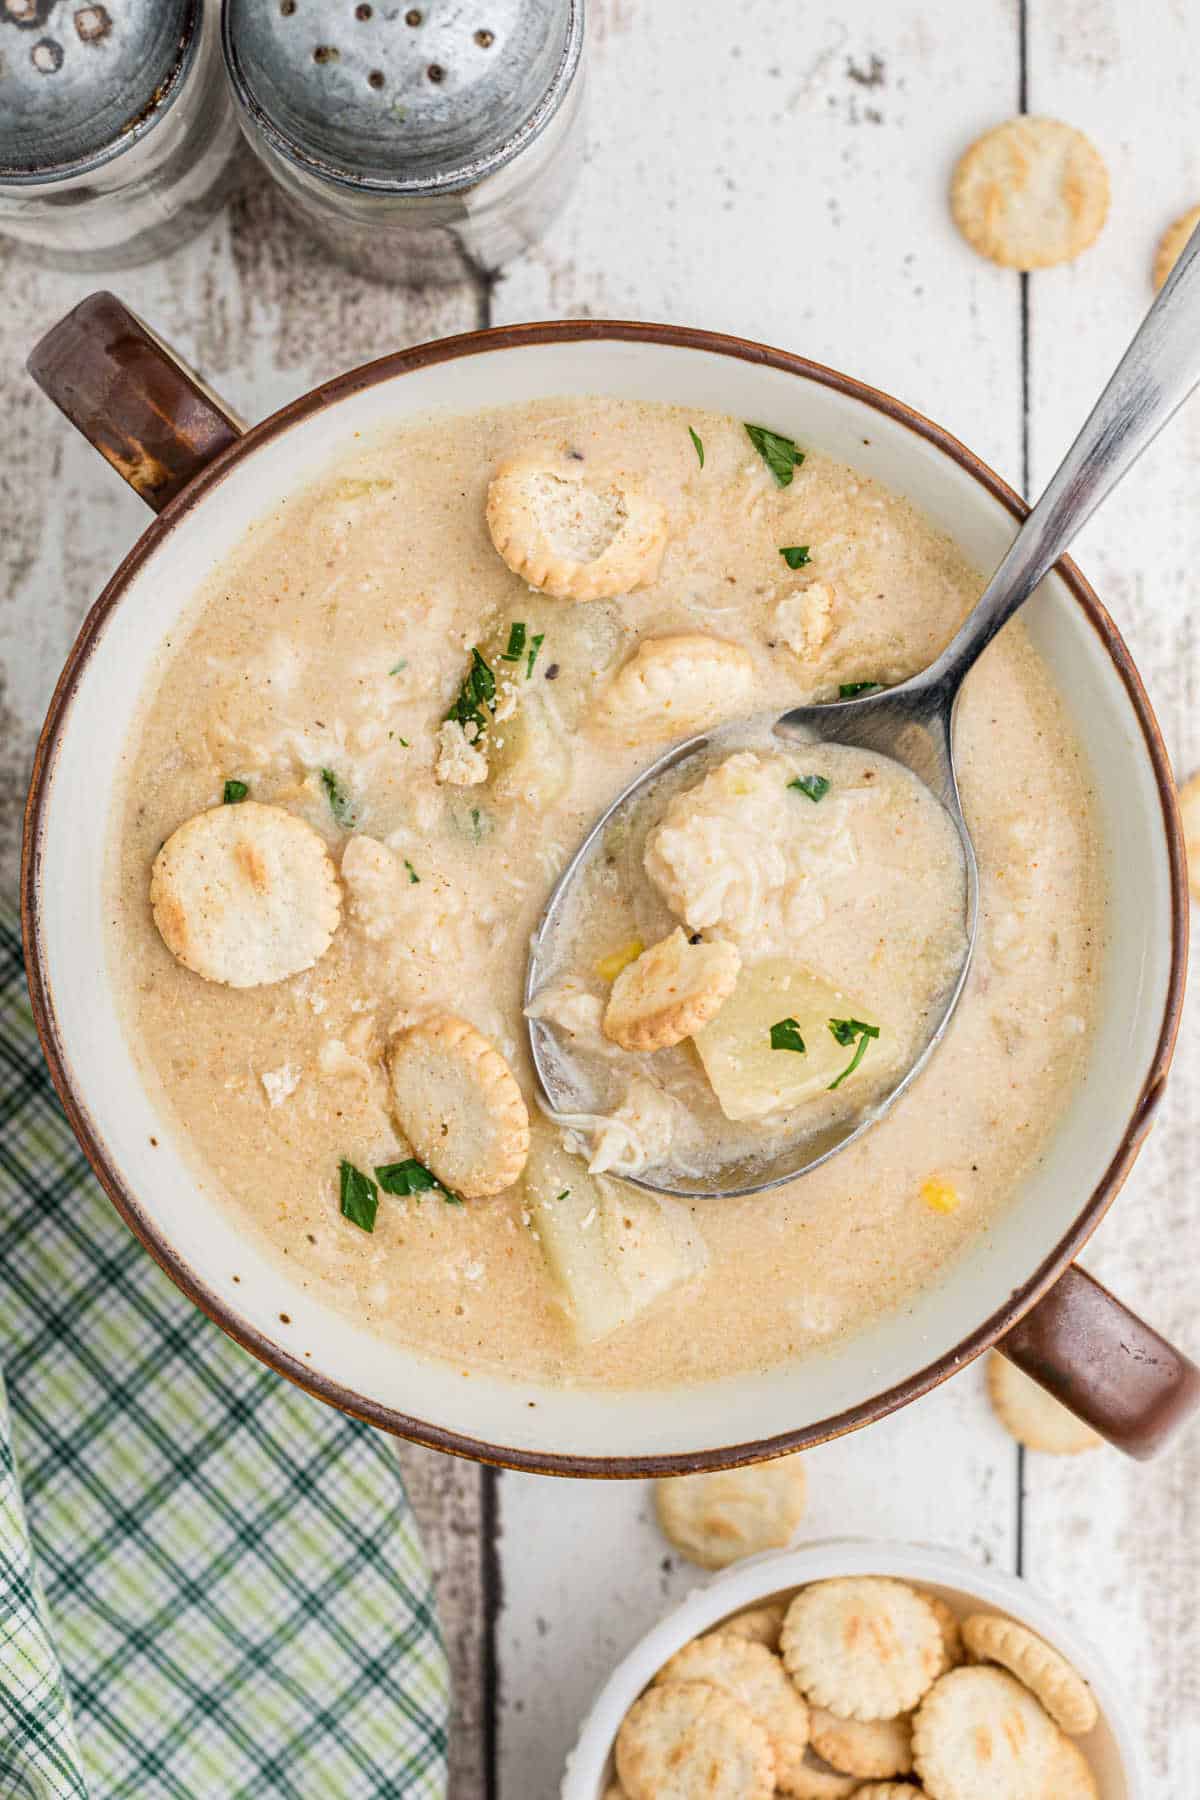 A portrait image of a bowl of crab chowder with a spoon digging into it.